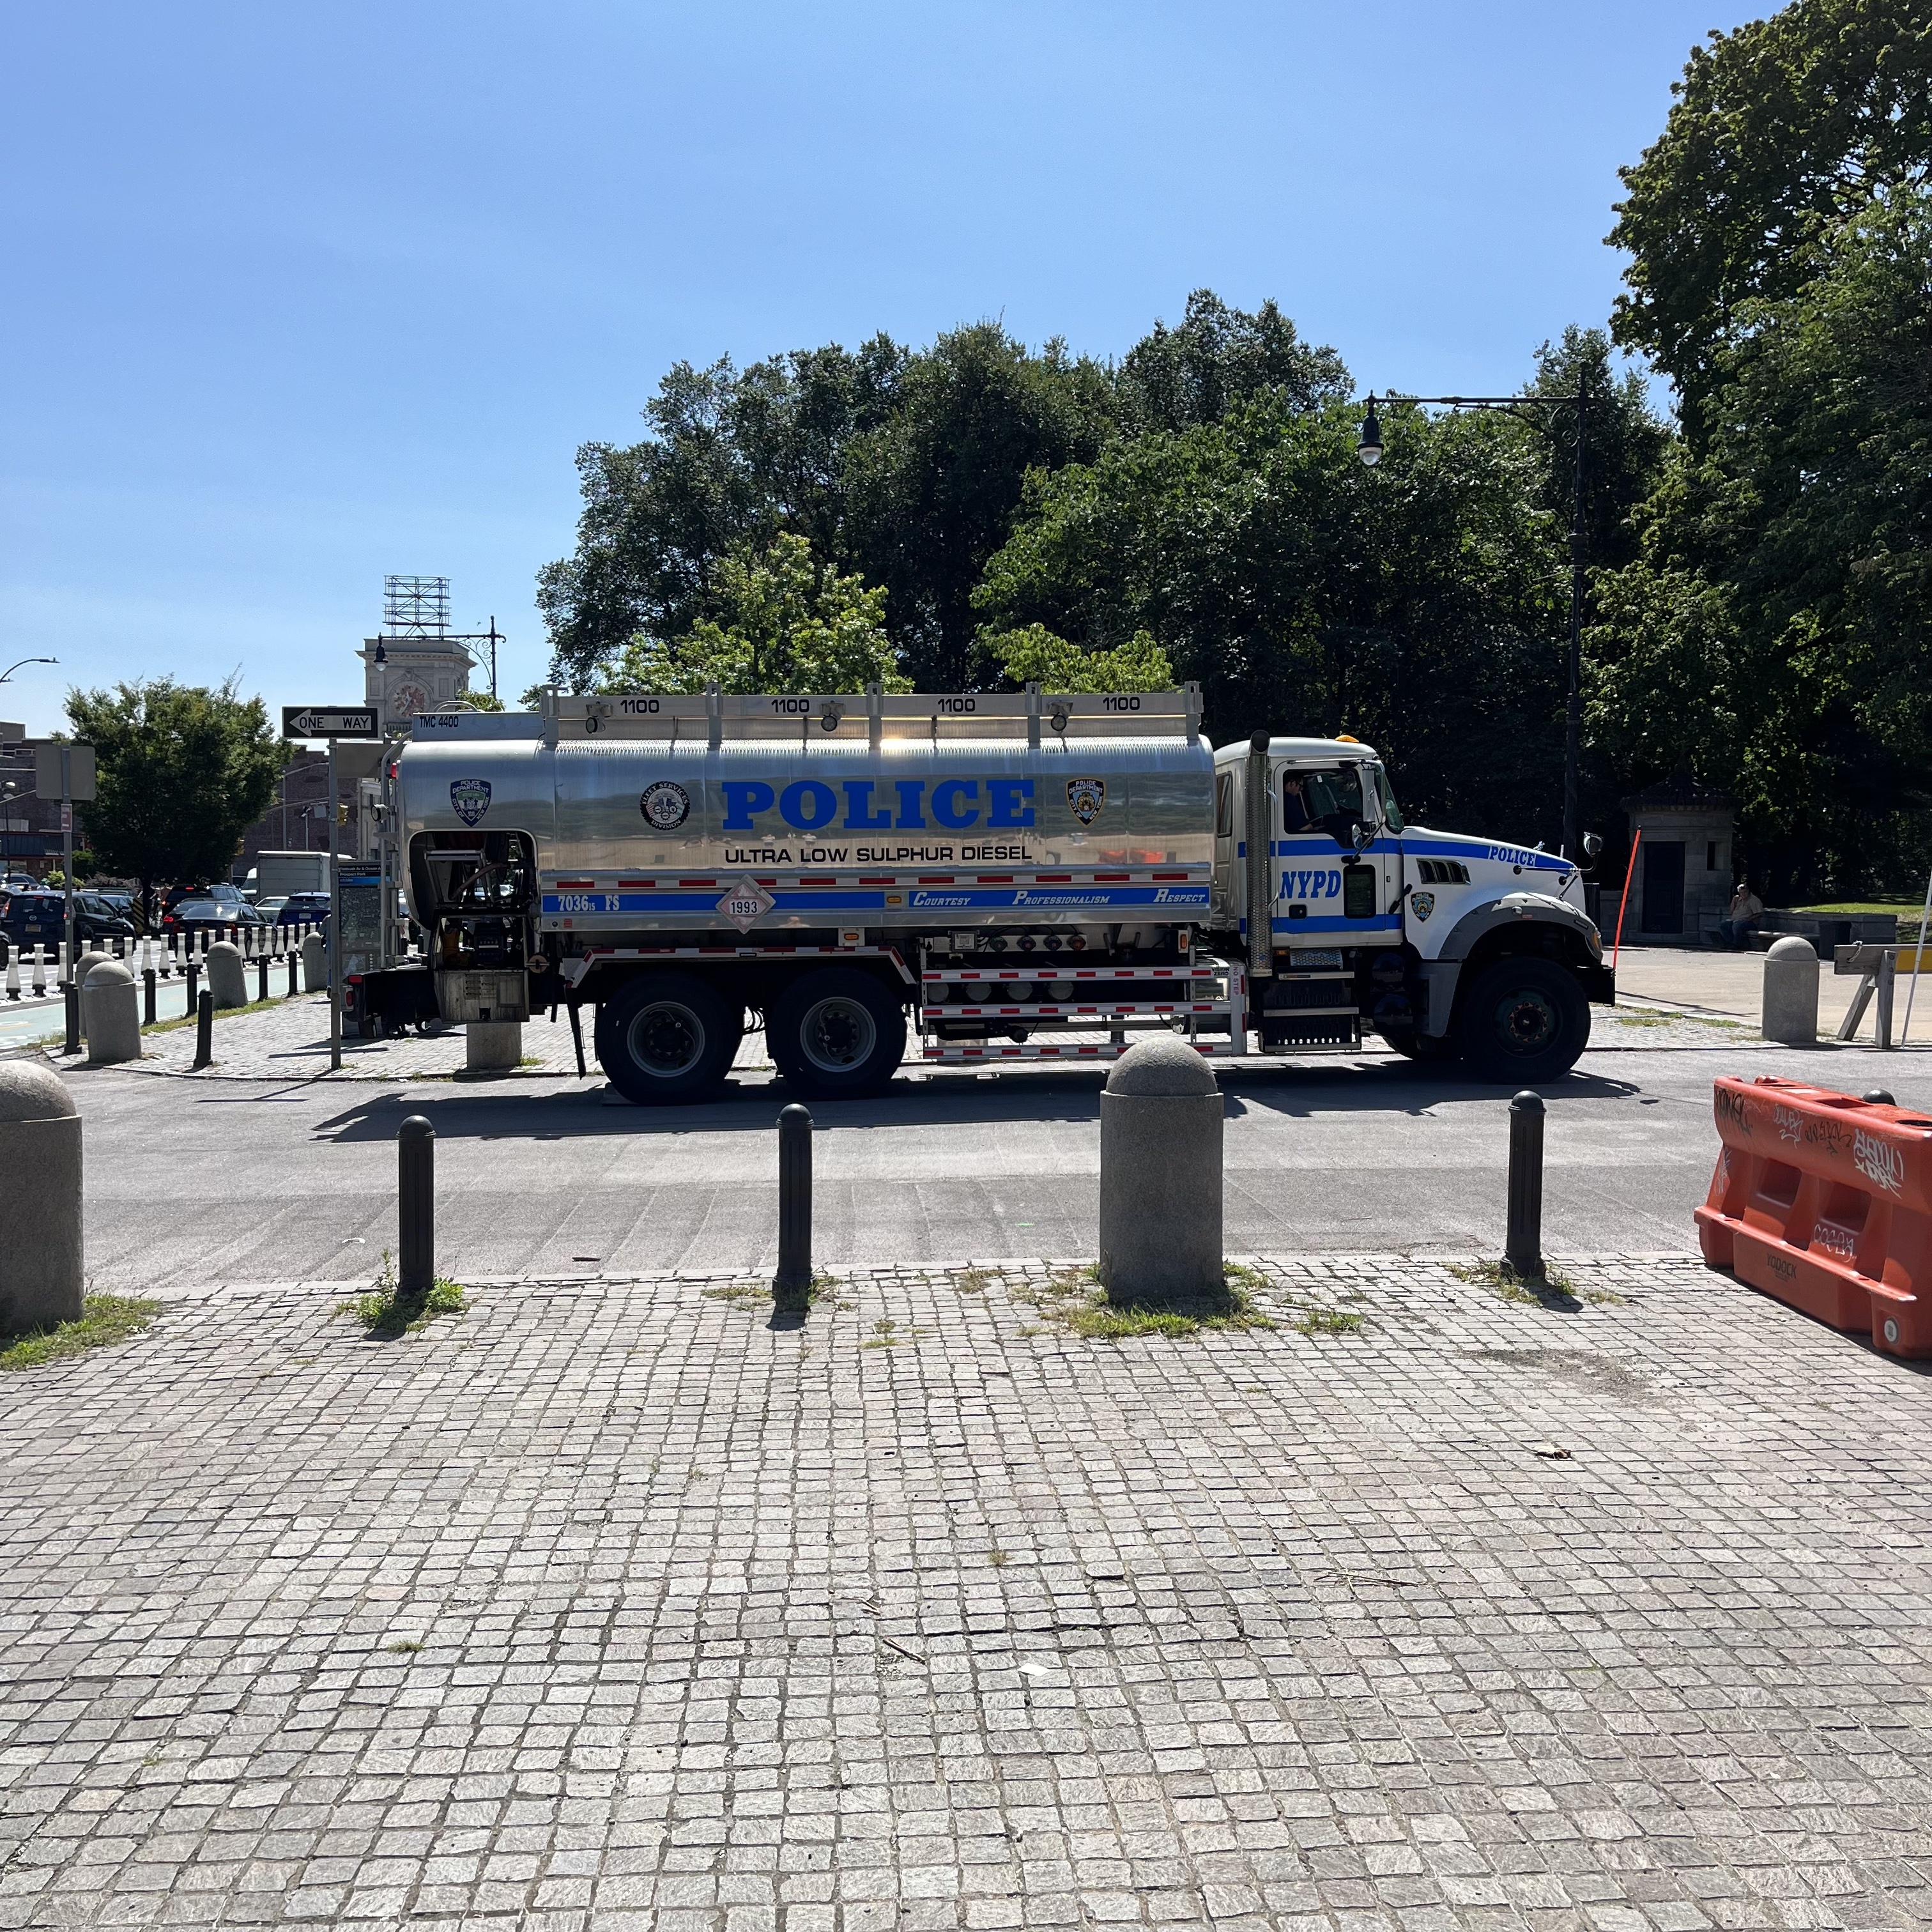 NYPD fuel truck (did you know these existed) at Prospect Park. Flatbush Avenue near Ocean Avenue, Brooklyn.